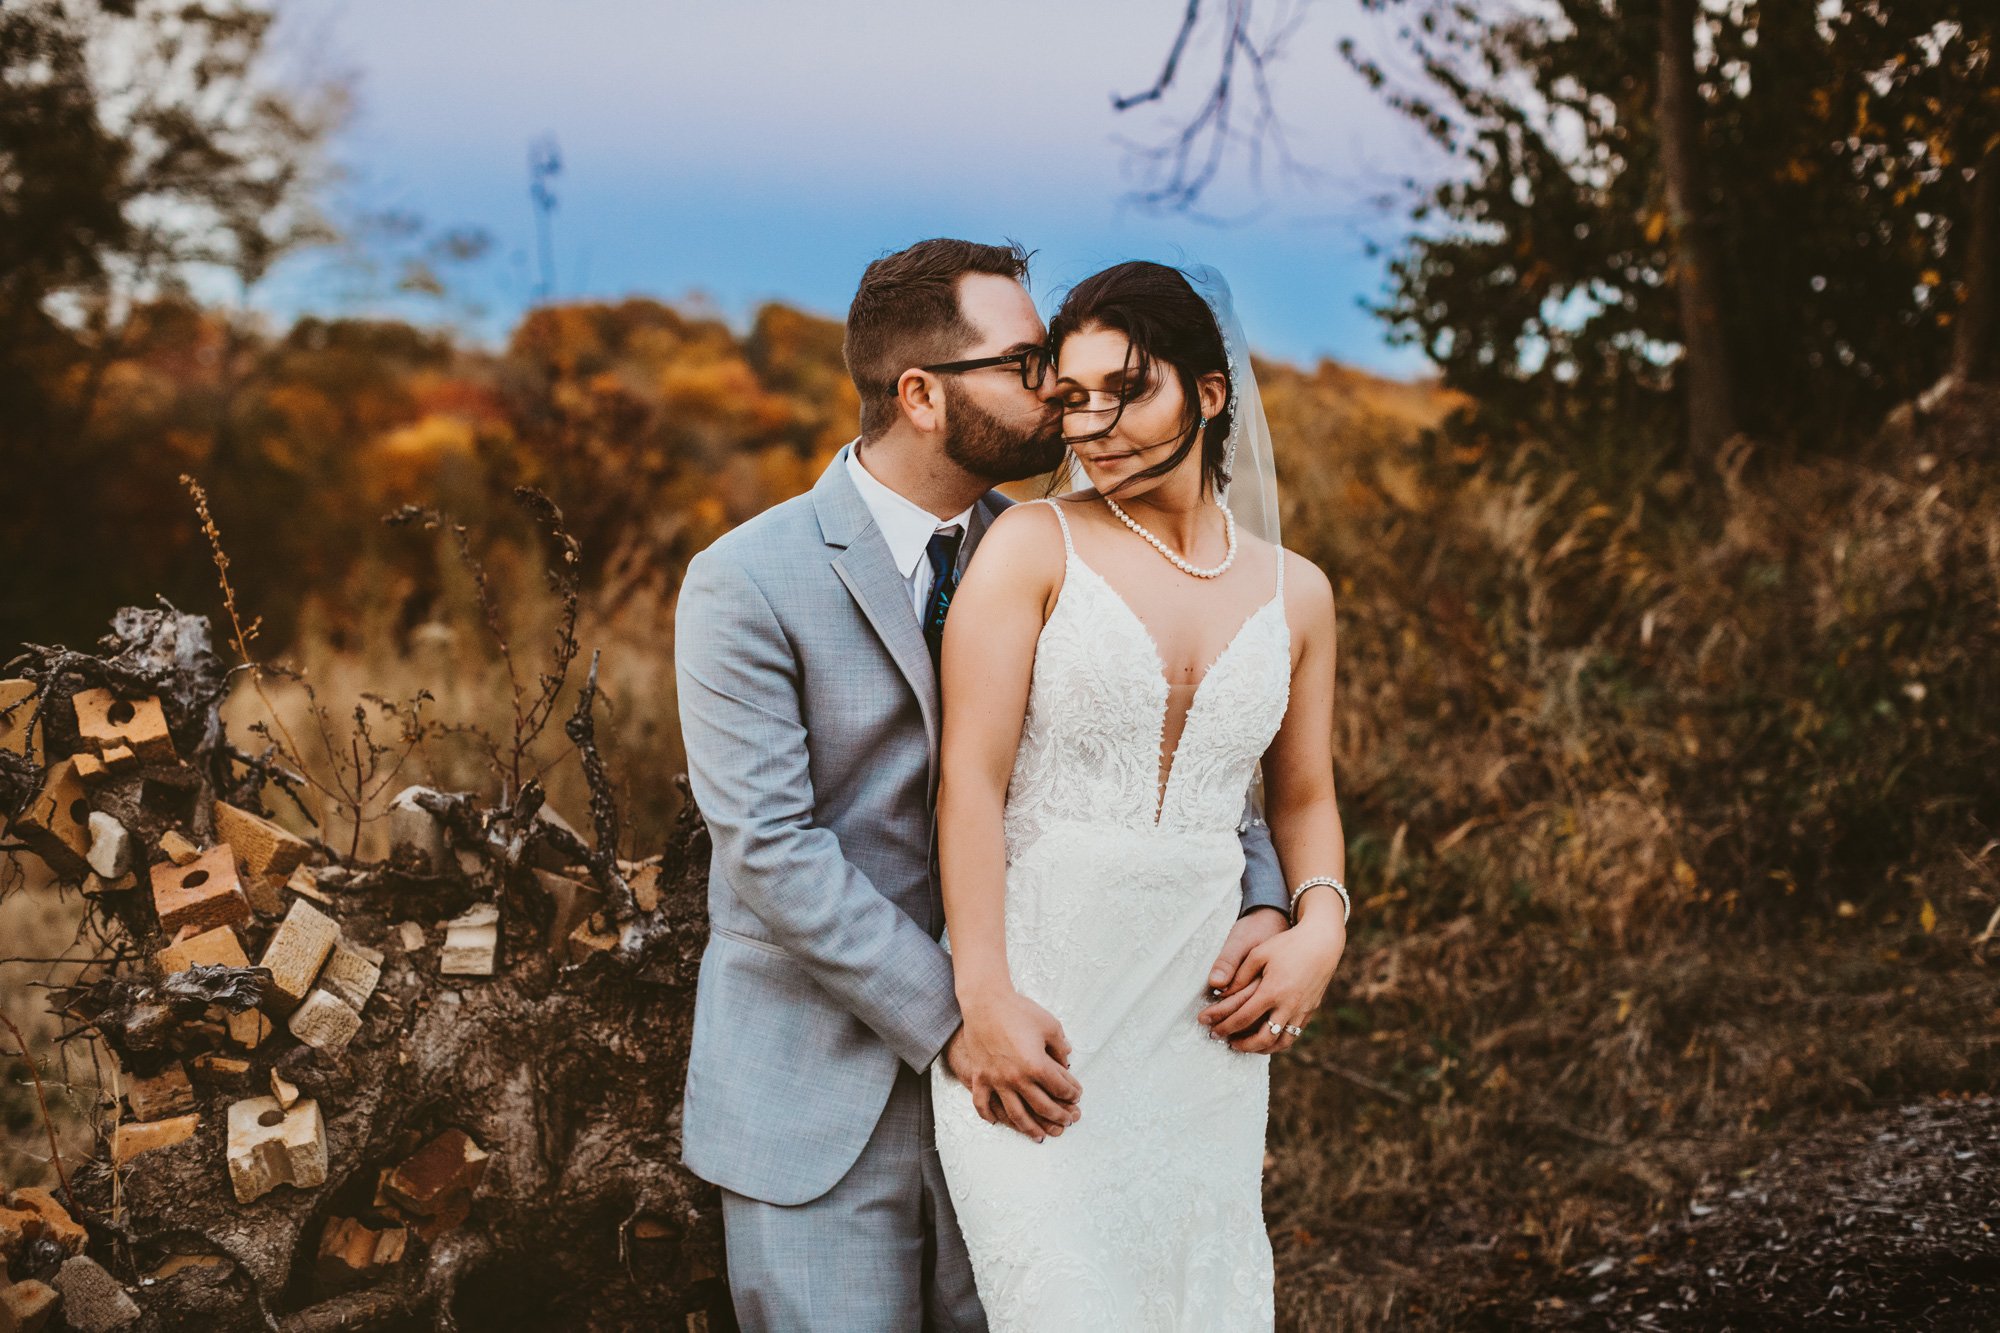  The groom kisses the bride’s cheek in an October landscape by Teala Ward Photography. Illinois fall weddings #TealaWardPhotography #TealaWardWeddings #WeddingLocationsIllinois #IllinoisWedding #weddingdetails #weddingphotography #married 